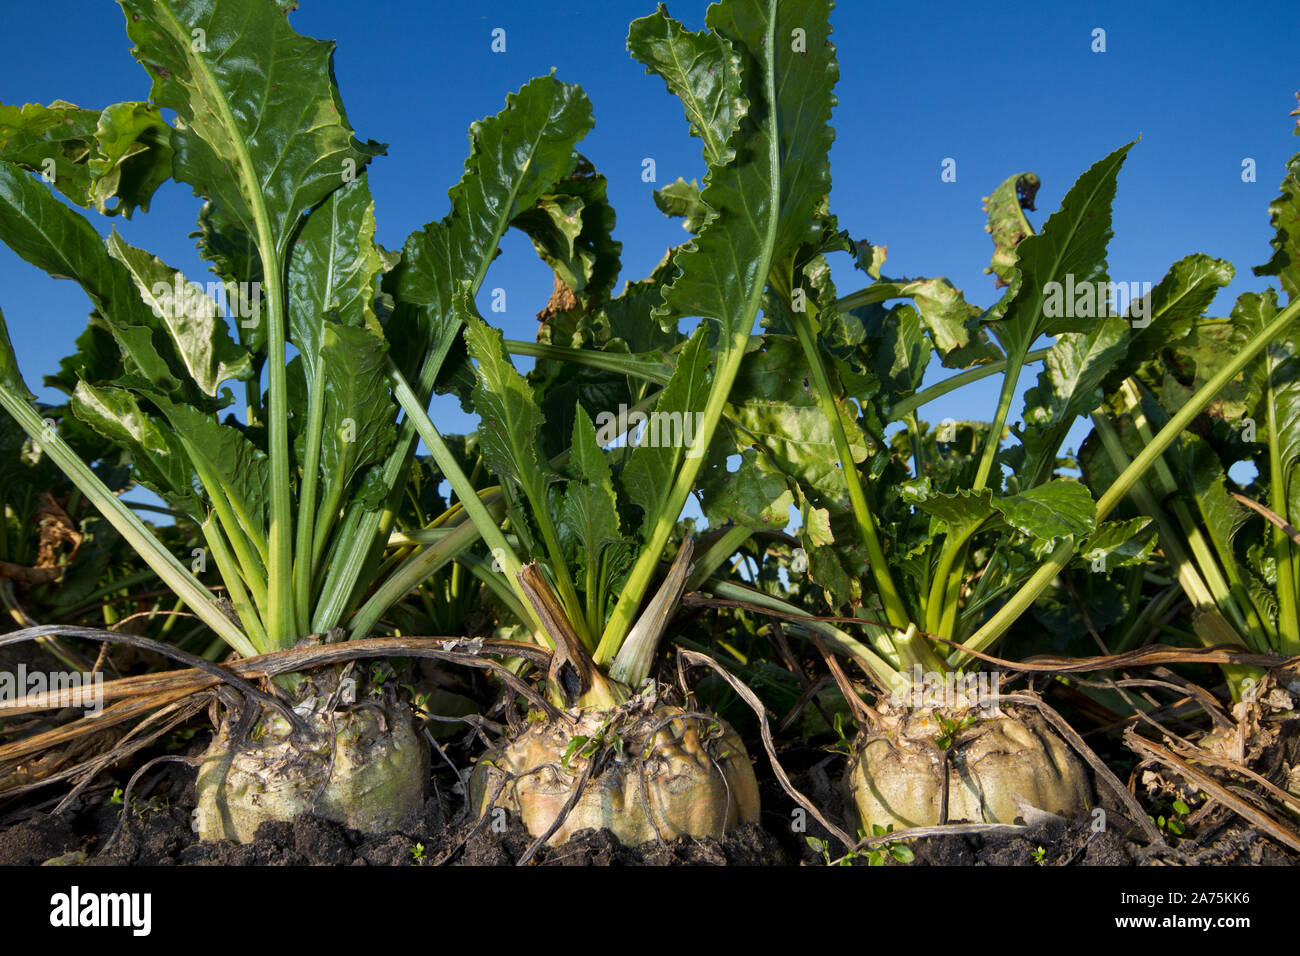 Close-up of Sugar beet, growing on a field under a blue sky Stock Photo